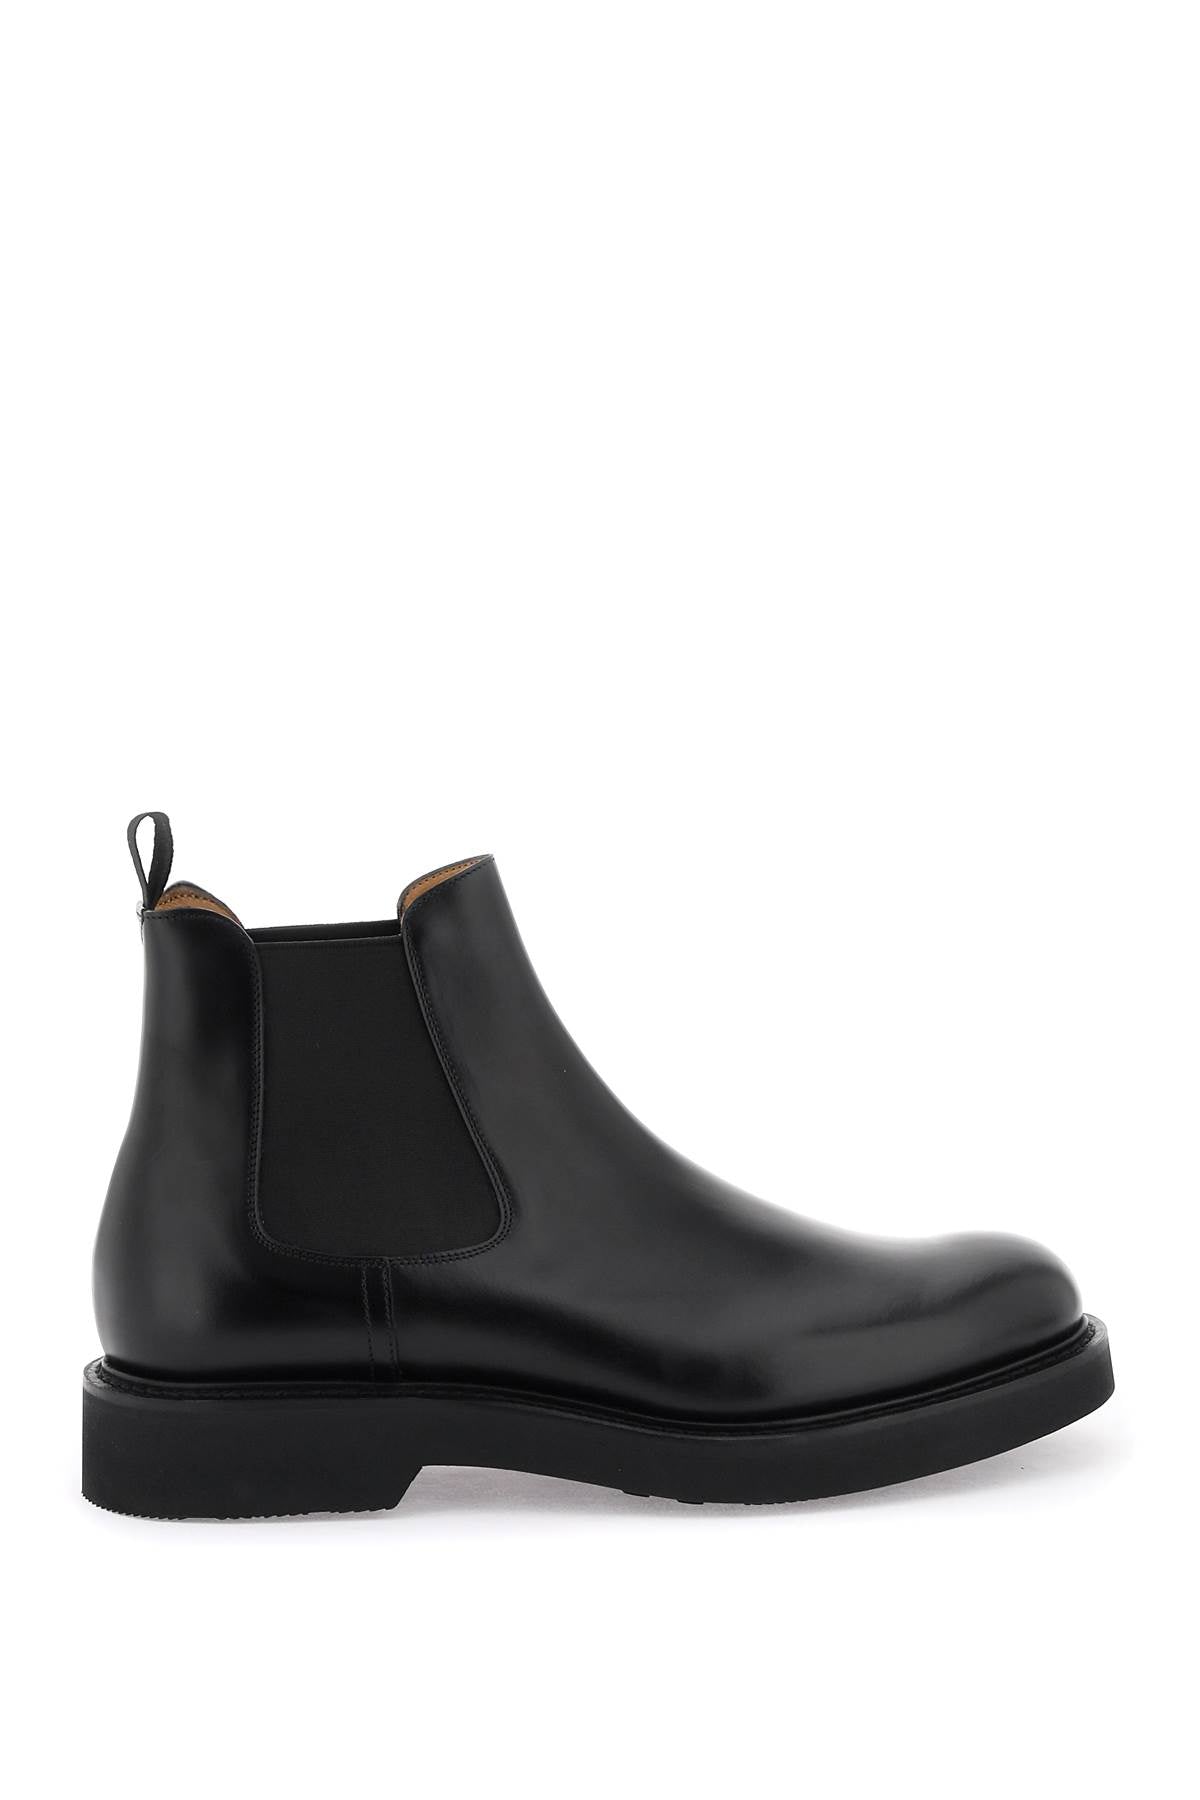 Church's leather leicester chelsea boots-0